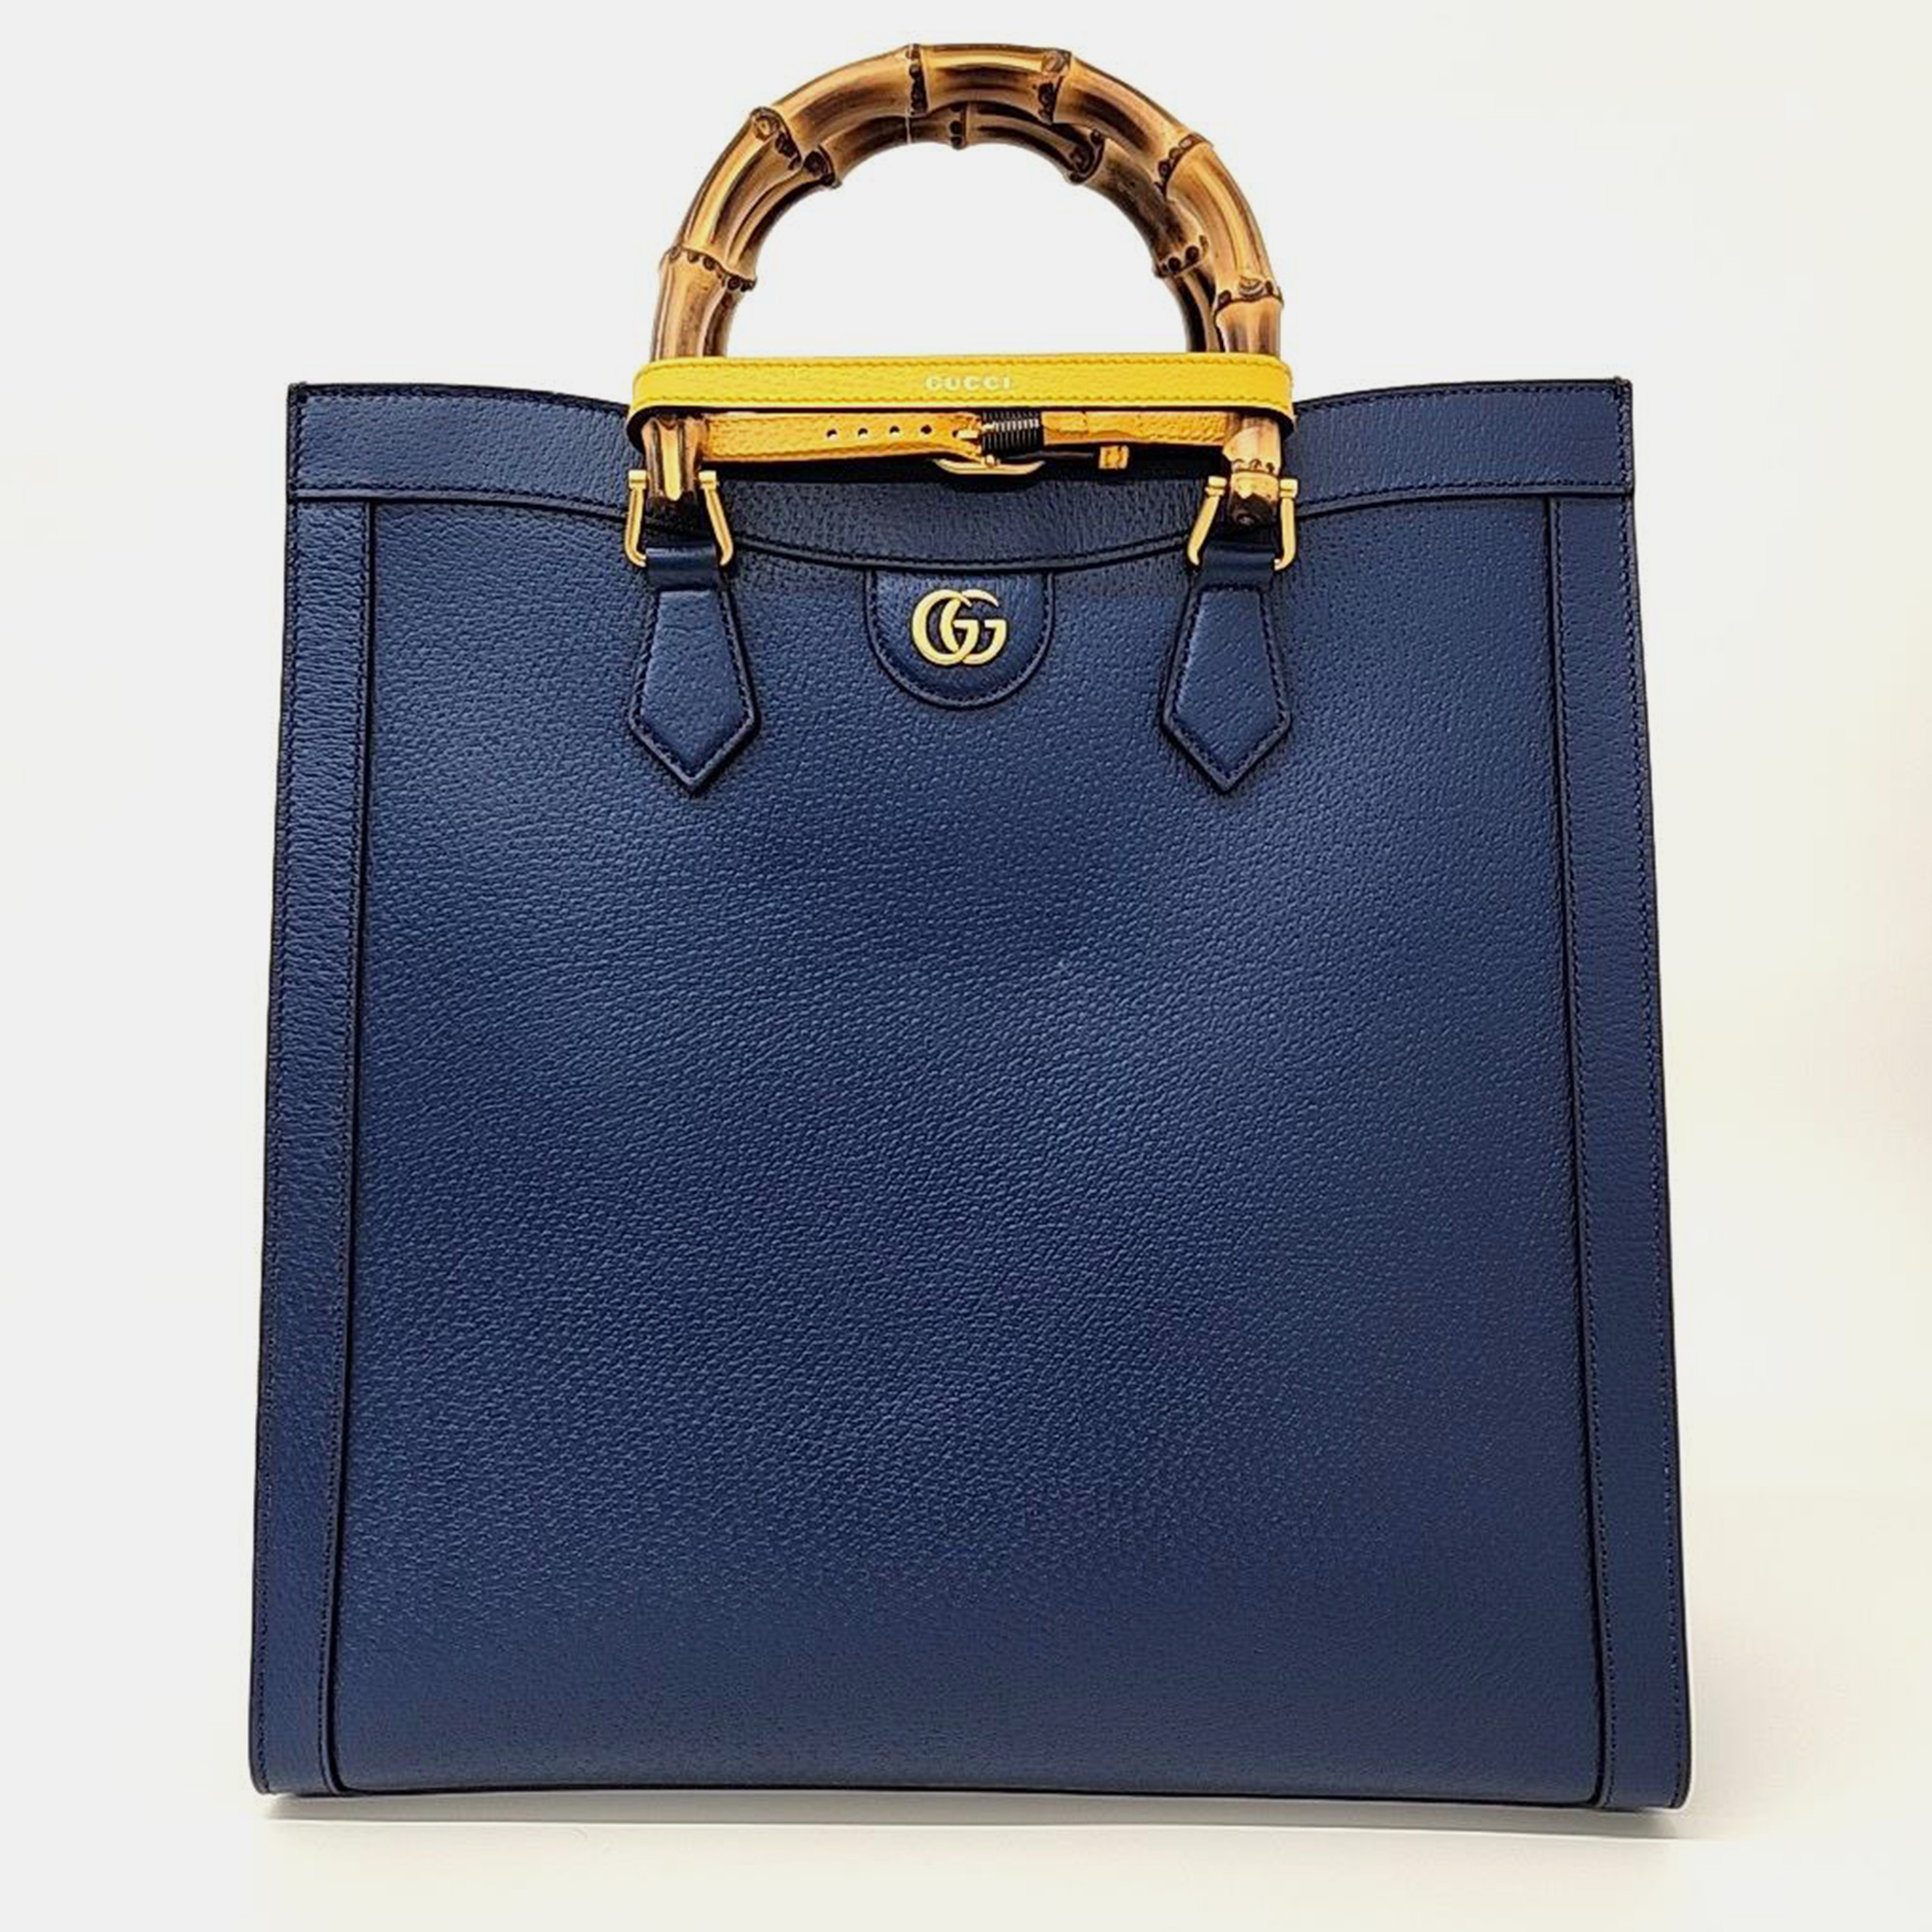 Uncompromising in quality and design this Gucci bag is a must have in any wardrobe. With its durable construction and luxurious finish its the perfect accessory for any occasion.